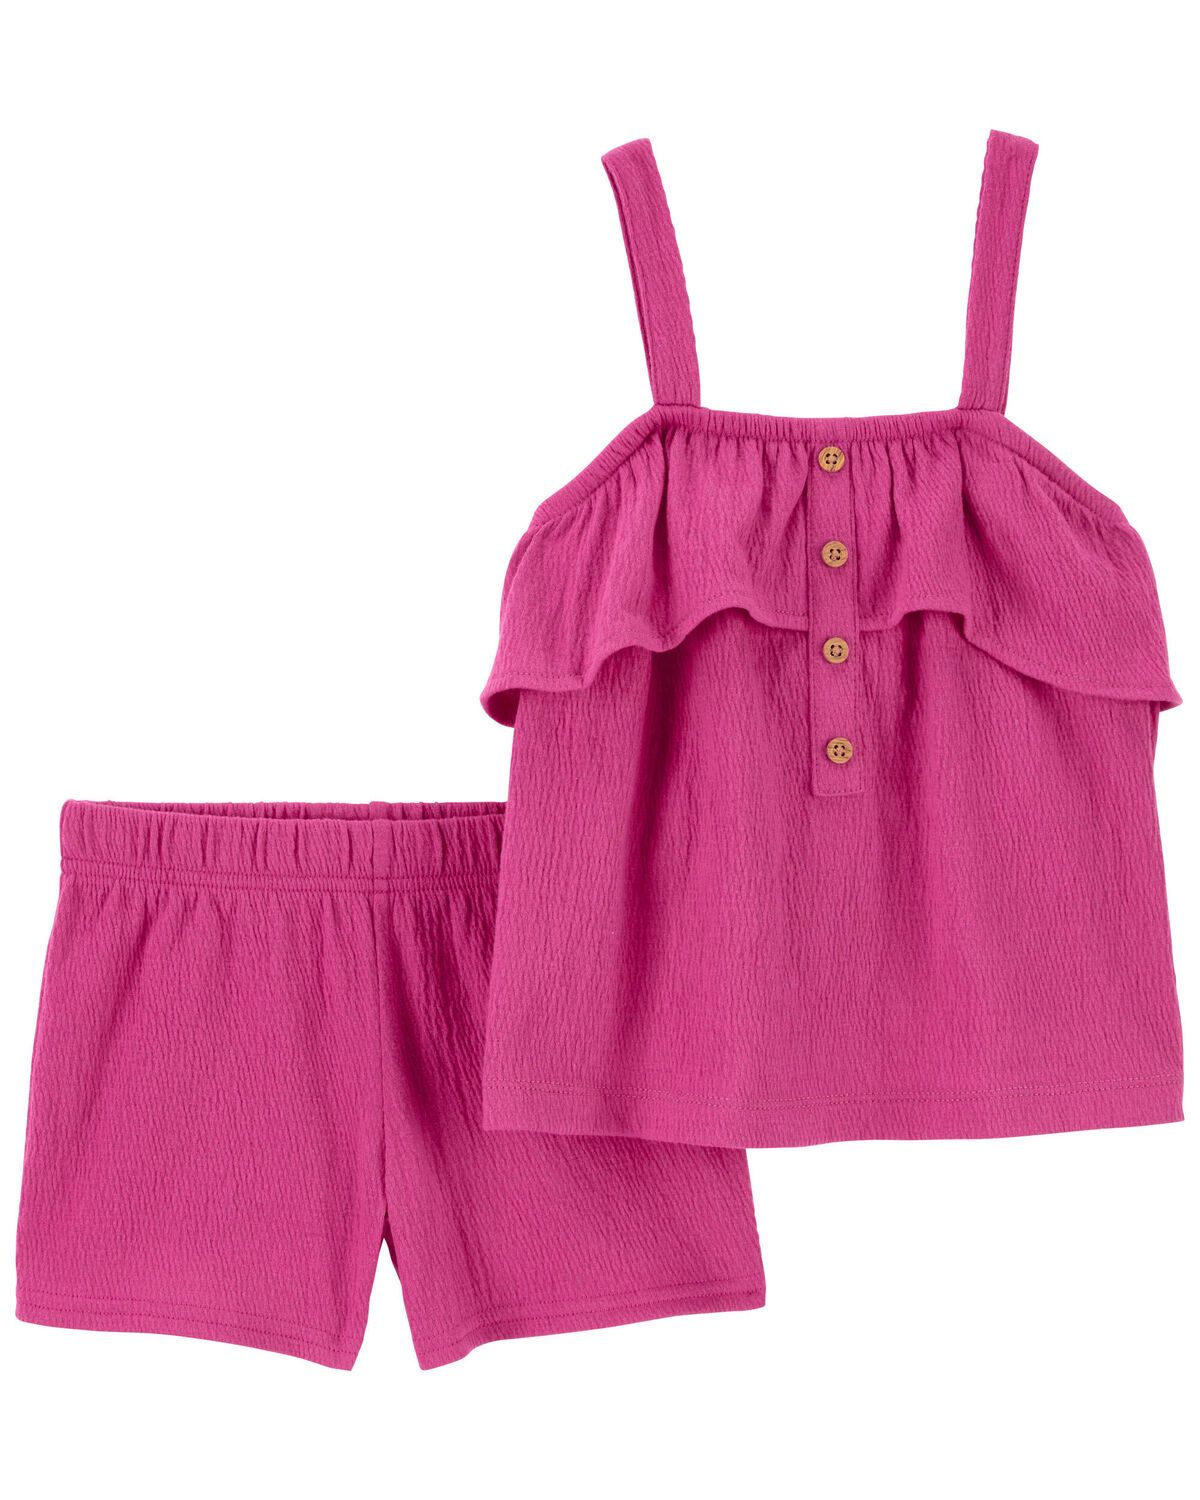 Baby 2-Piece Crinkle Jersey Outfit Set | Carter's